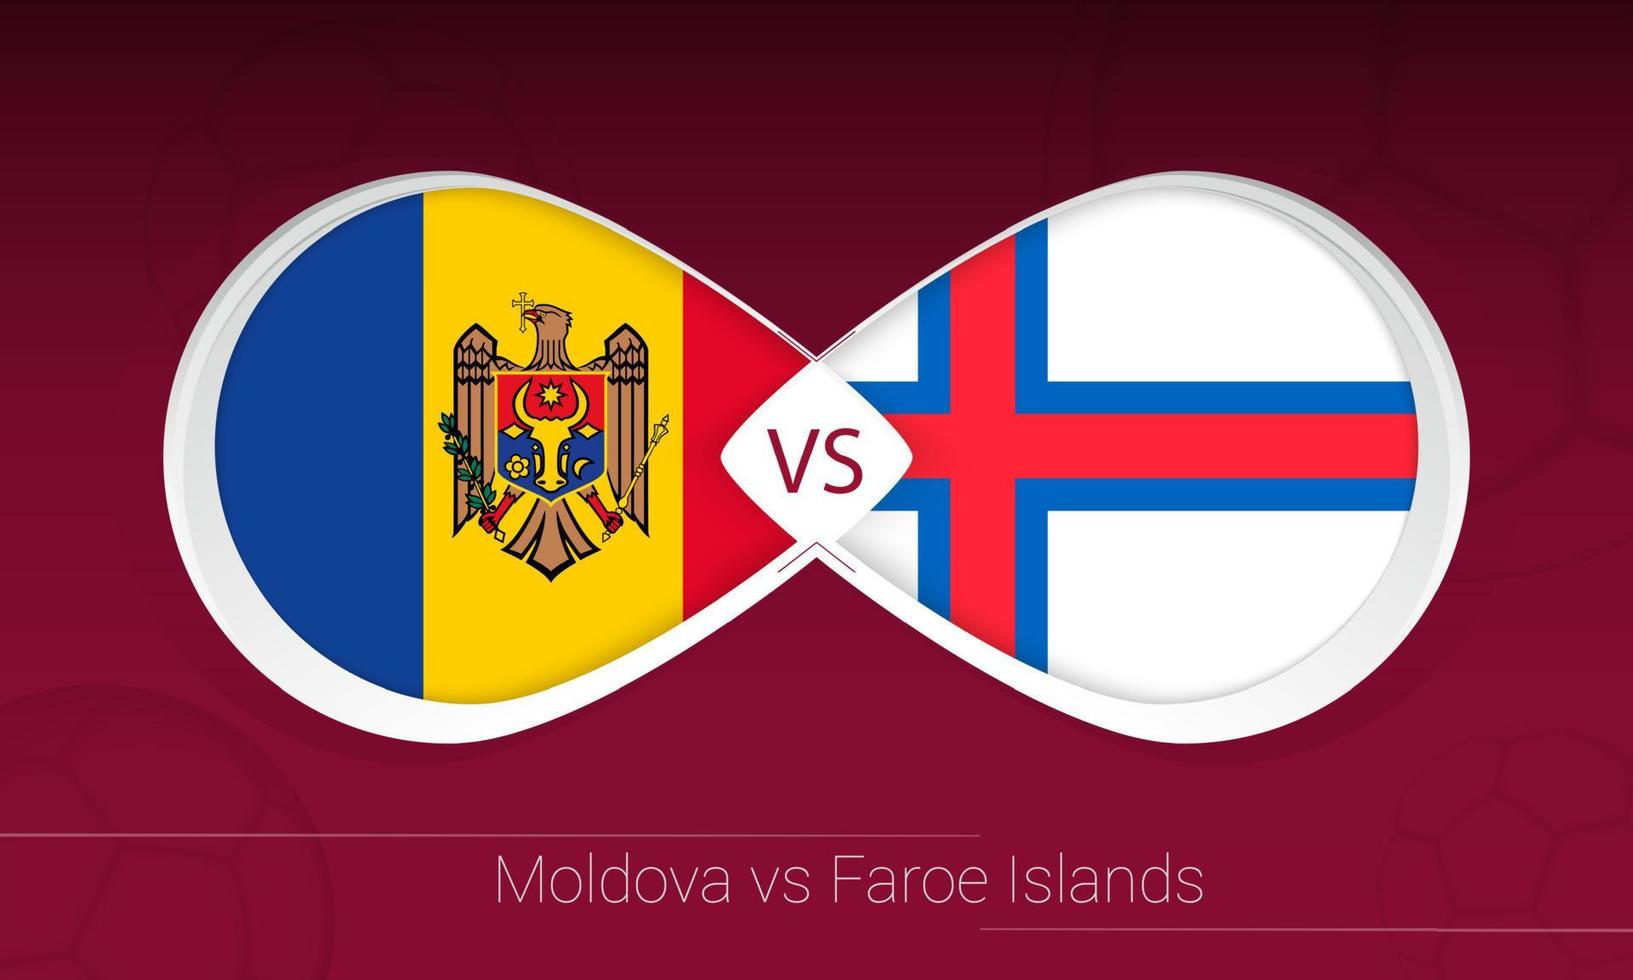 Moldova vs Faroe Islands in Football Competition, Group F. Versus icon on Football background. vector